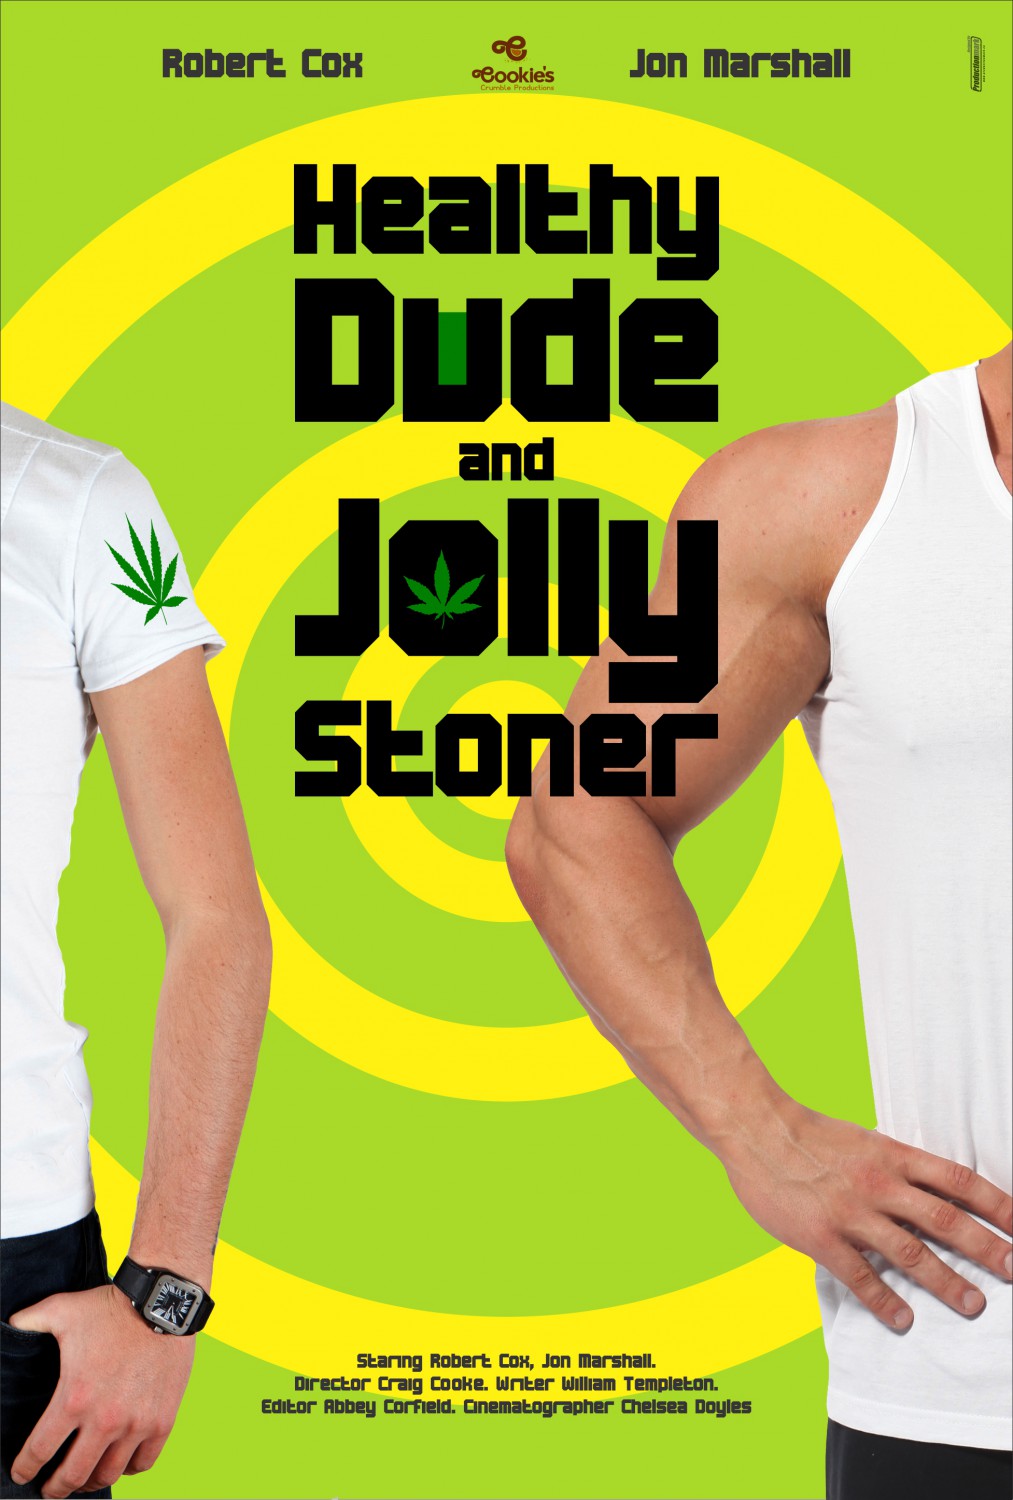 Productionmark-Services-Film-Poster-Design-Short-Film-Healthy-Dude-And-Jolly-Stoner